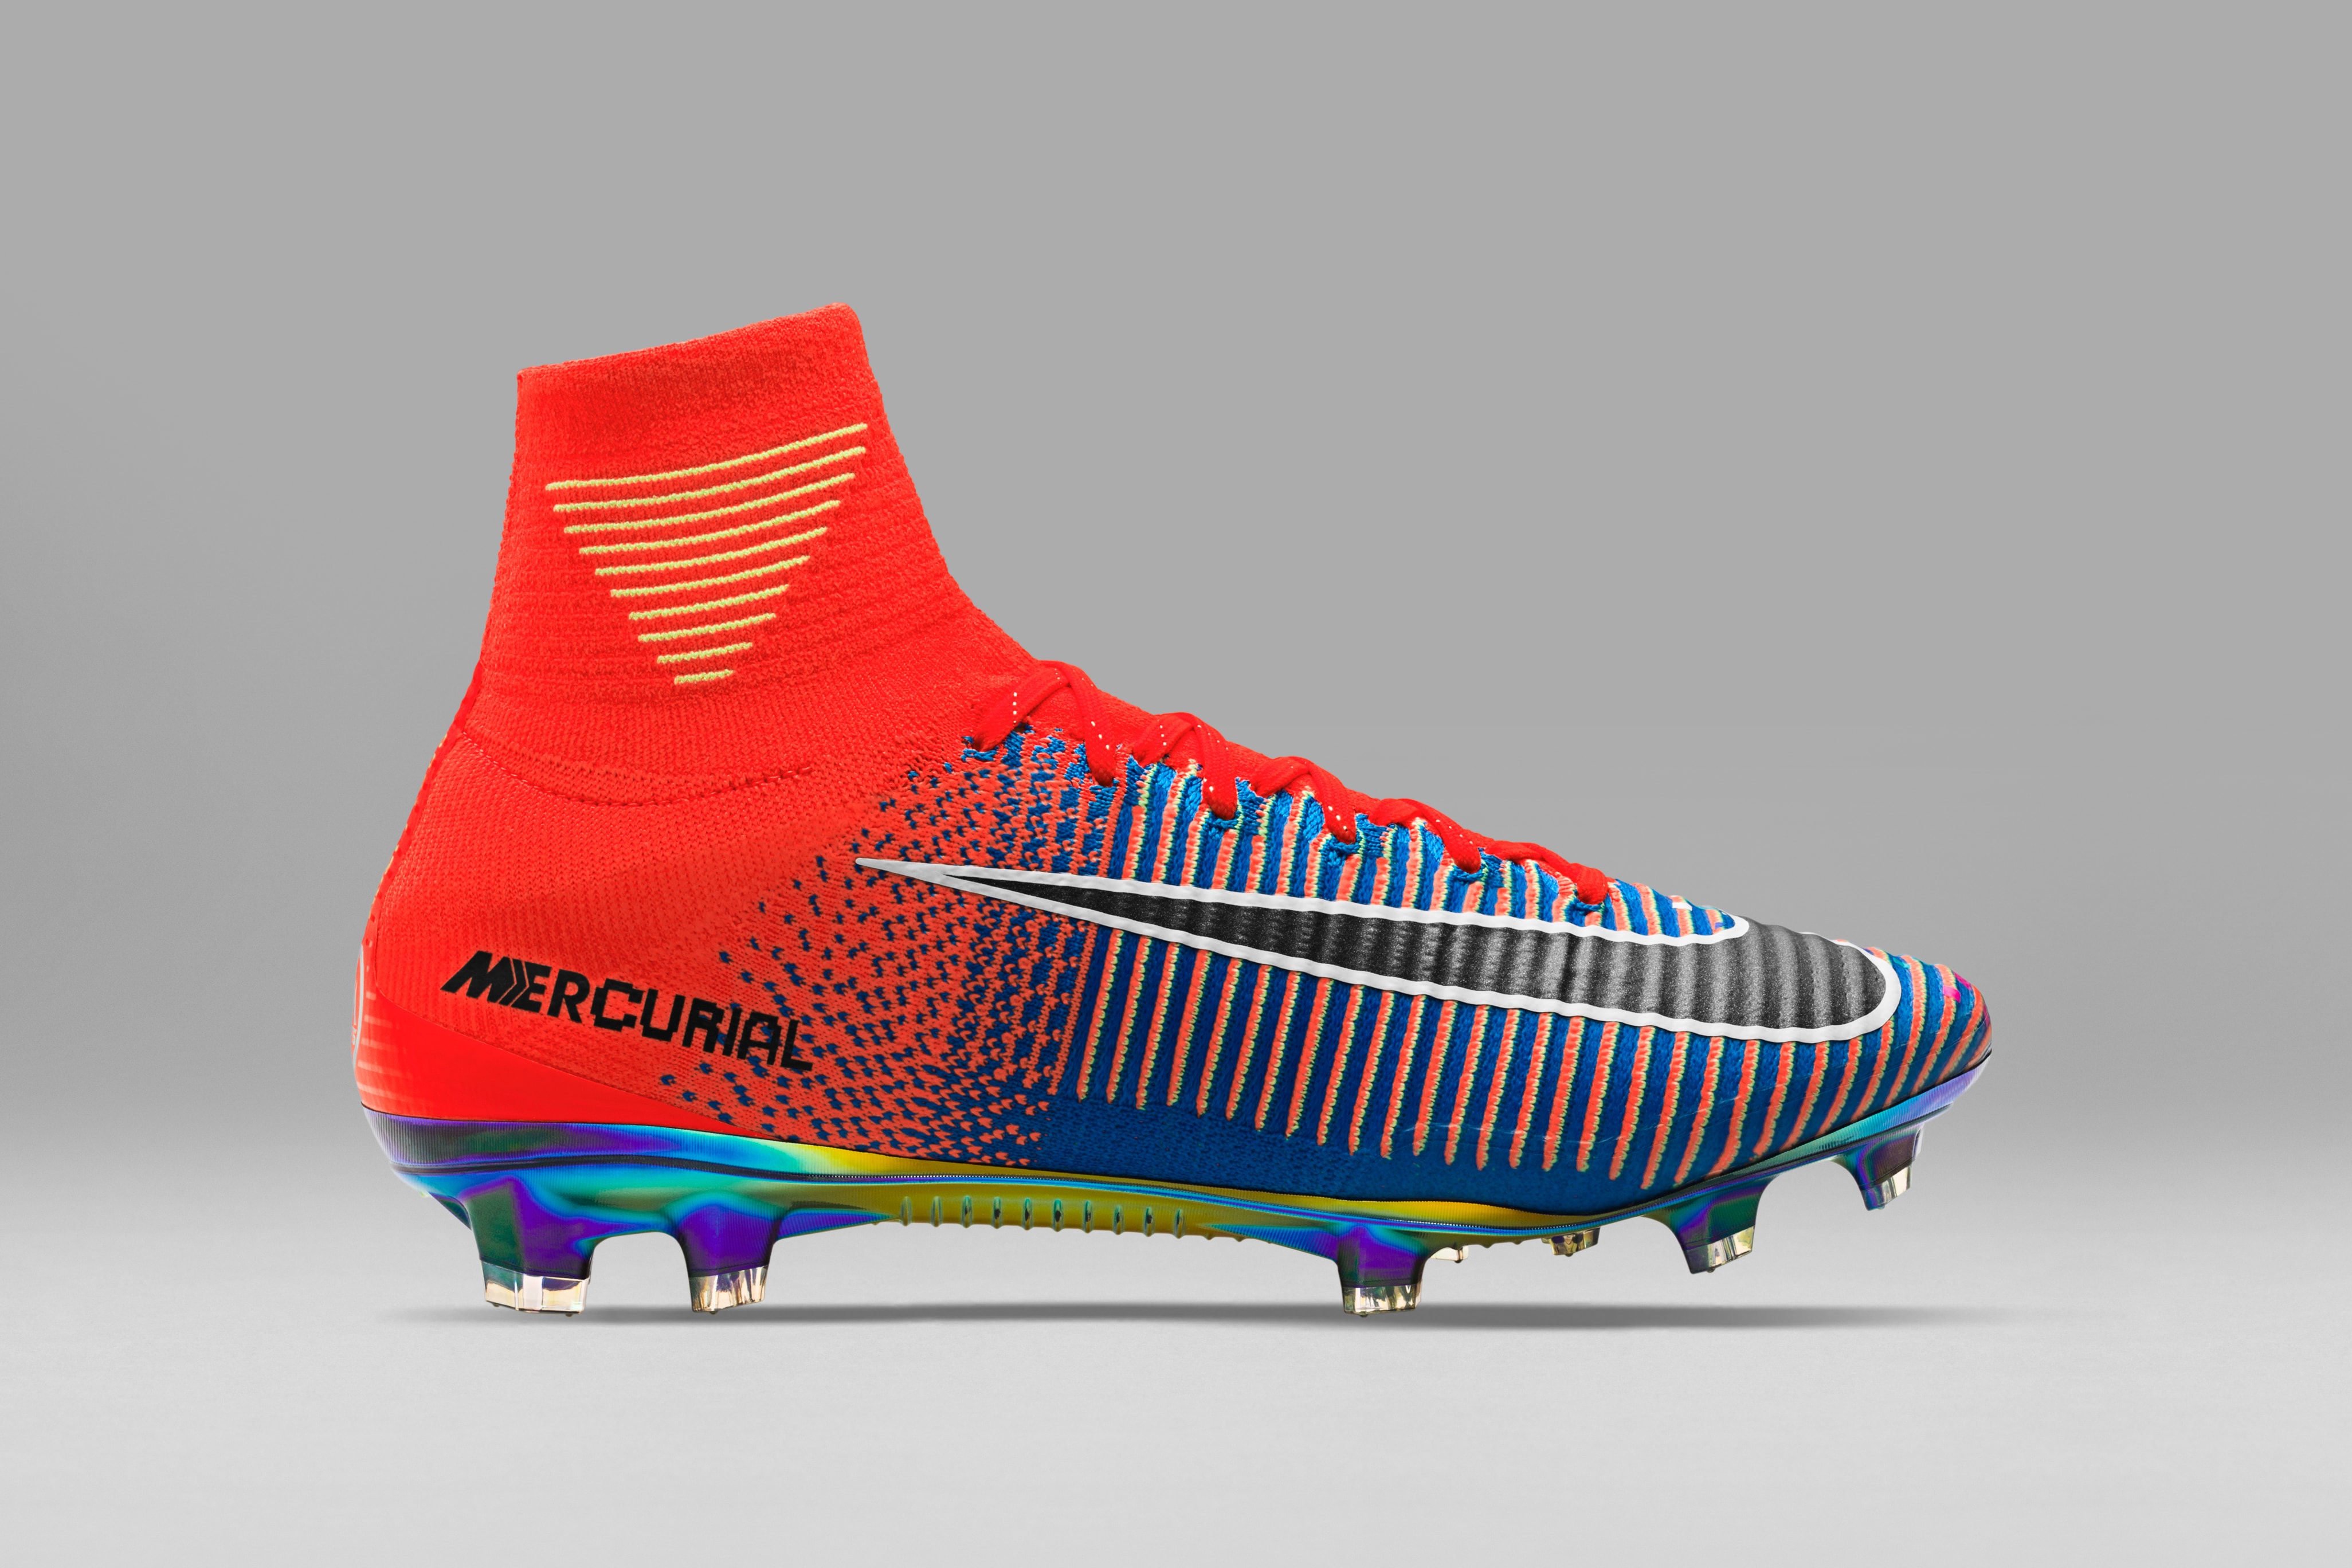 Nike's Mercurial Superfly x EA Sports Football Cleats are a Pixilated Dream soccer field sport FIFA